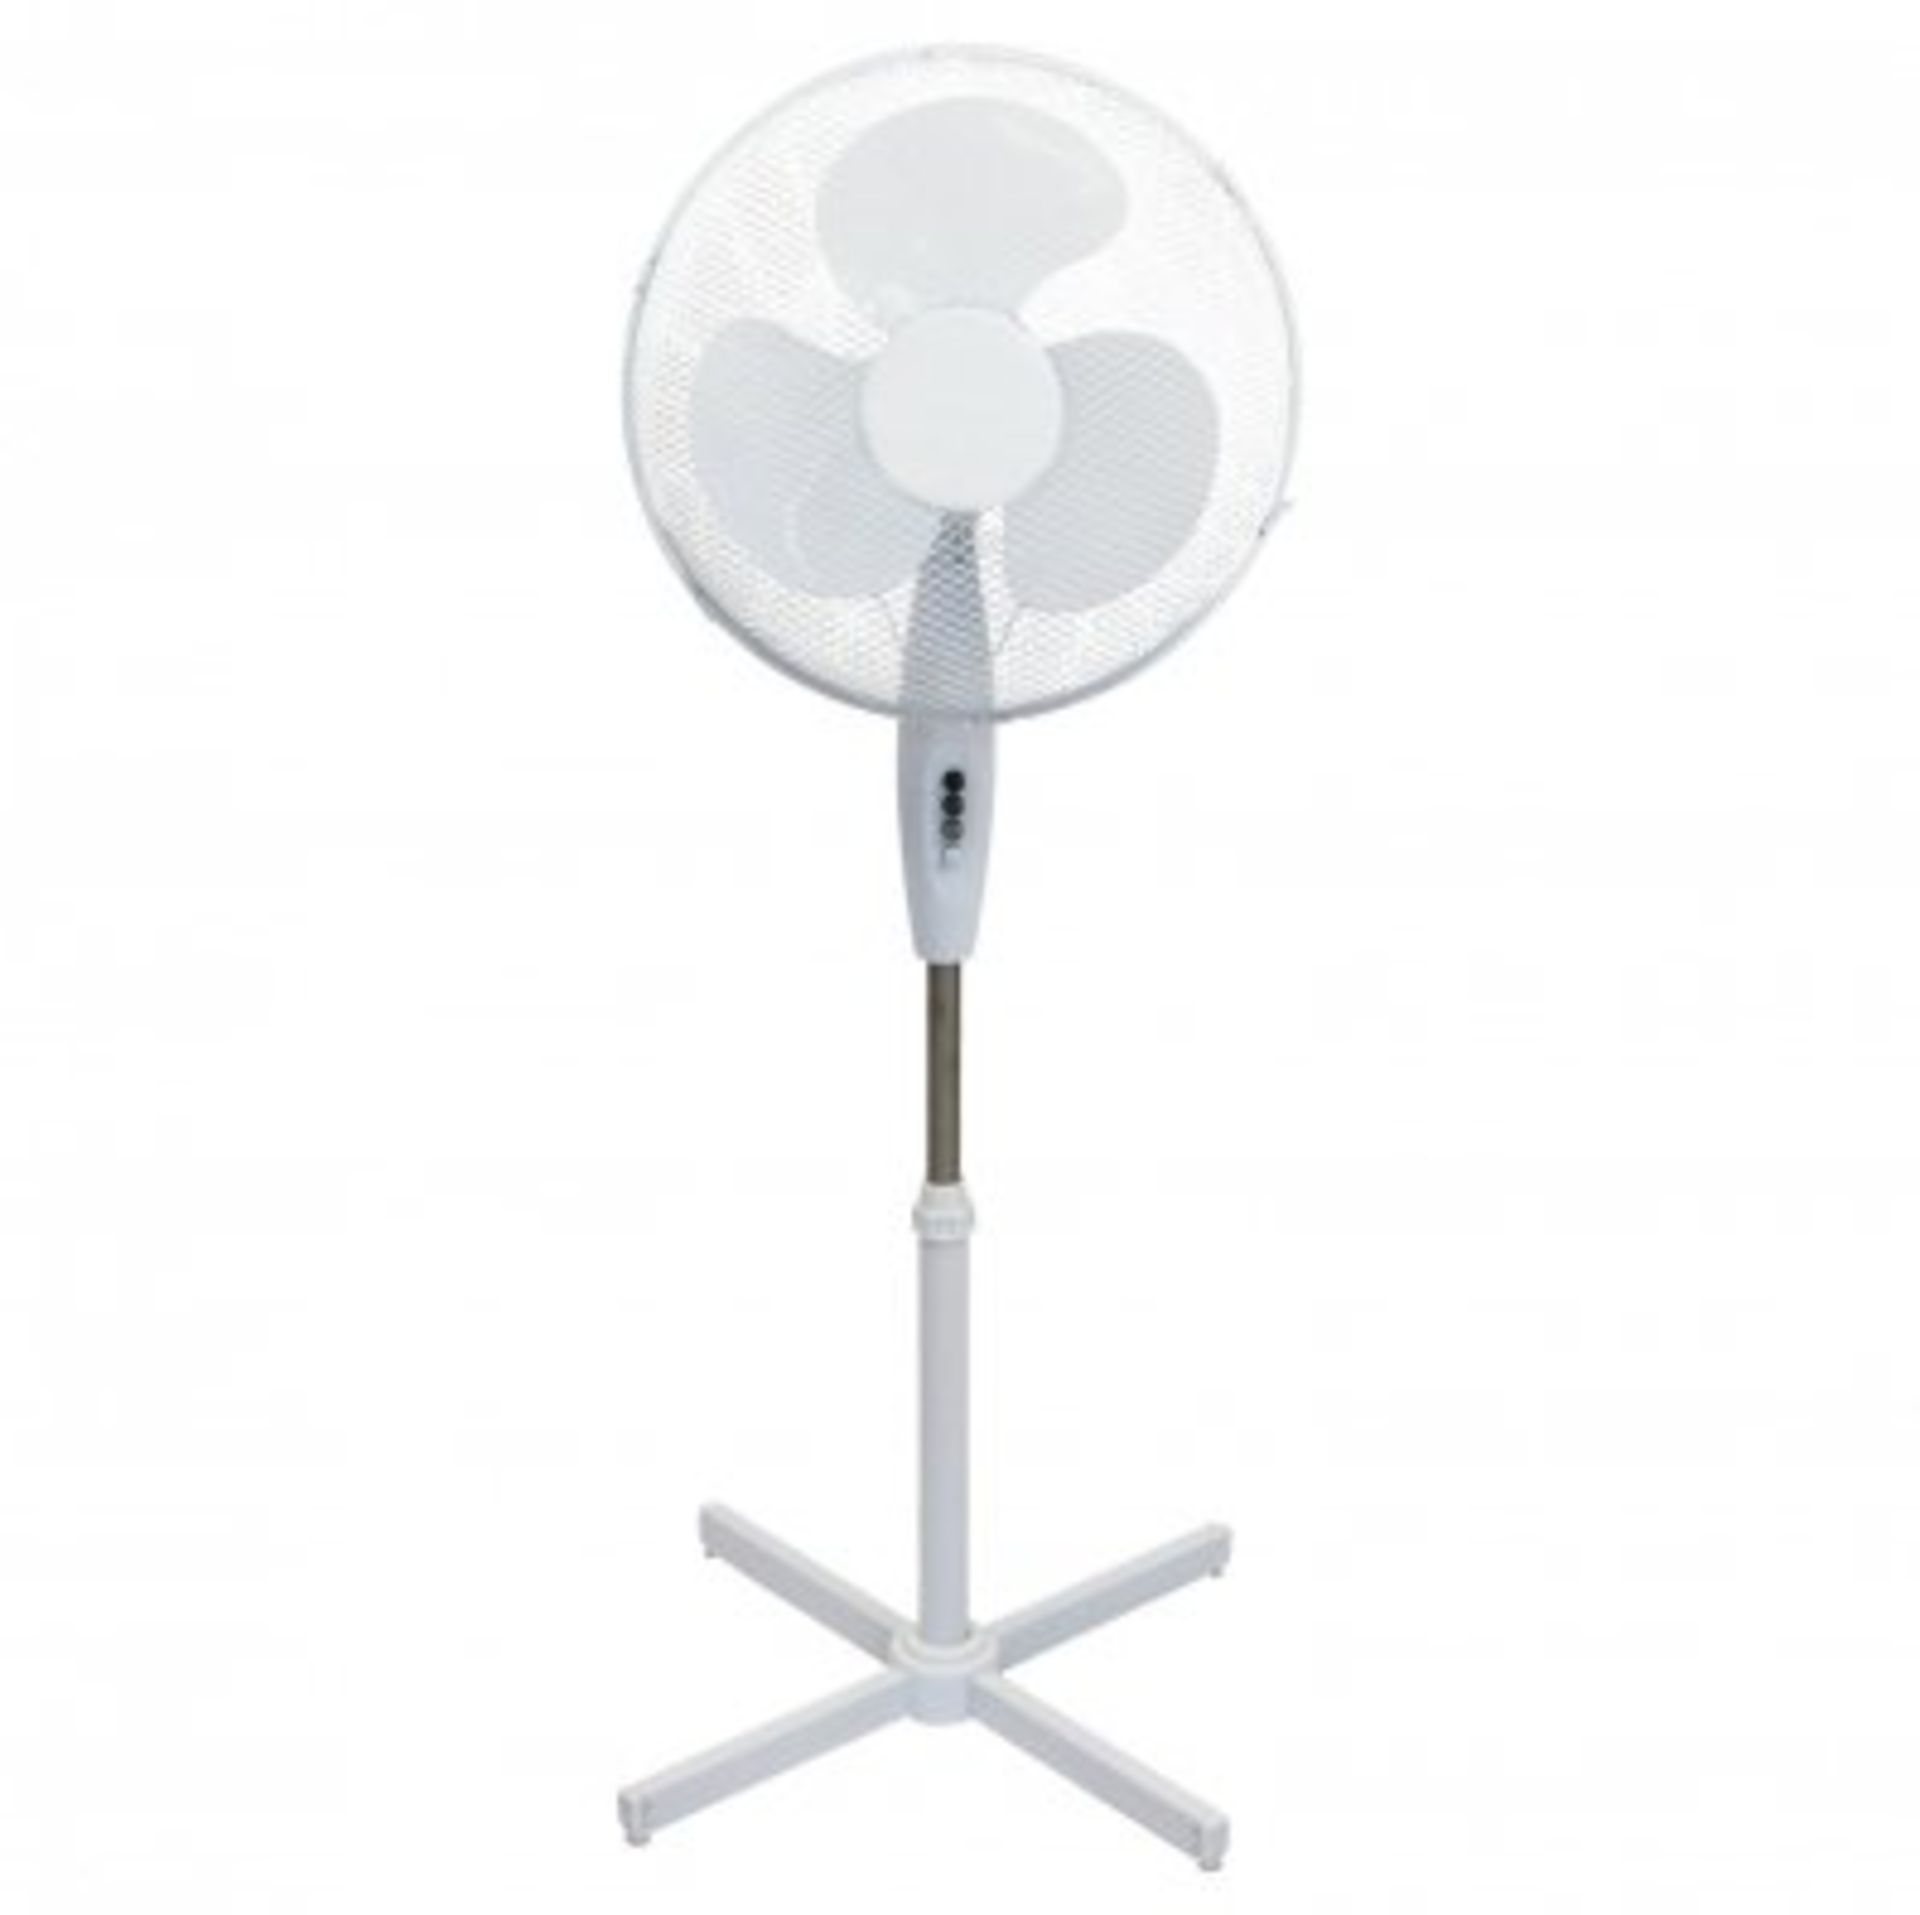 (LF20) 16" Oscillating Pedestal Electric Fan The fan head oscillates and tilts which me...